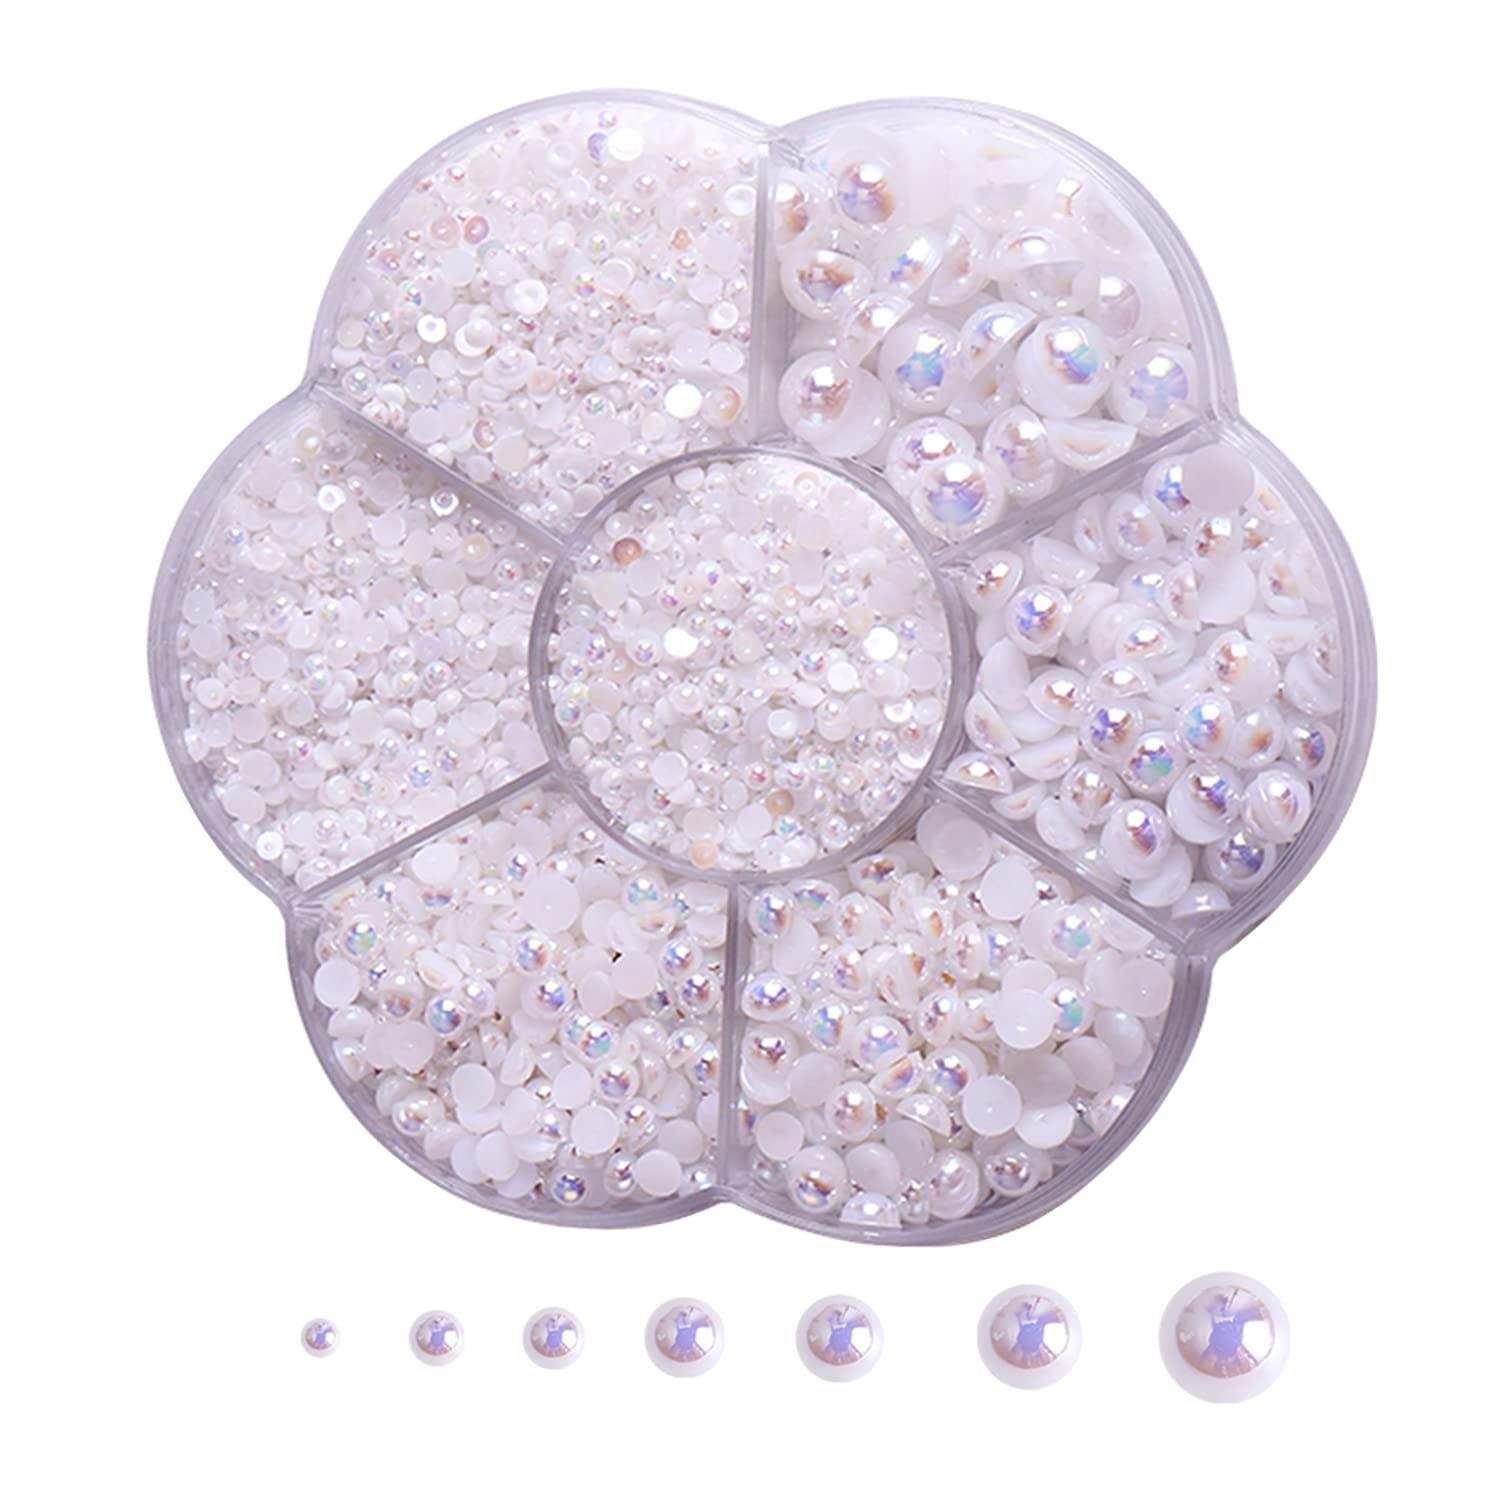 6000 Pcs Flatback Pearl,Half Pearls for Crafts, Nail Pearls for Nails Art, Flatback  Pearls Gems for Makeup. Neatly Organized AB White Pearls for Artists  Creative. Available in 7 Sizes:2/3/4/5/6/8/10mm